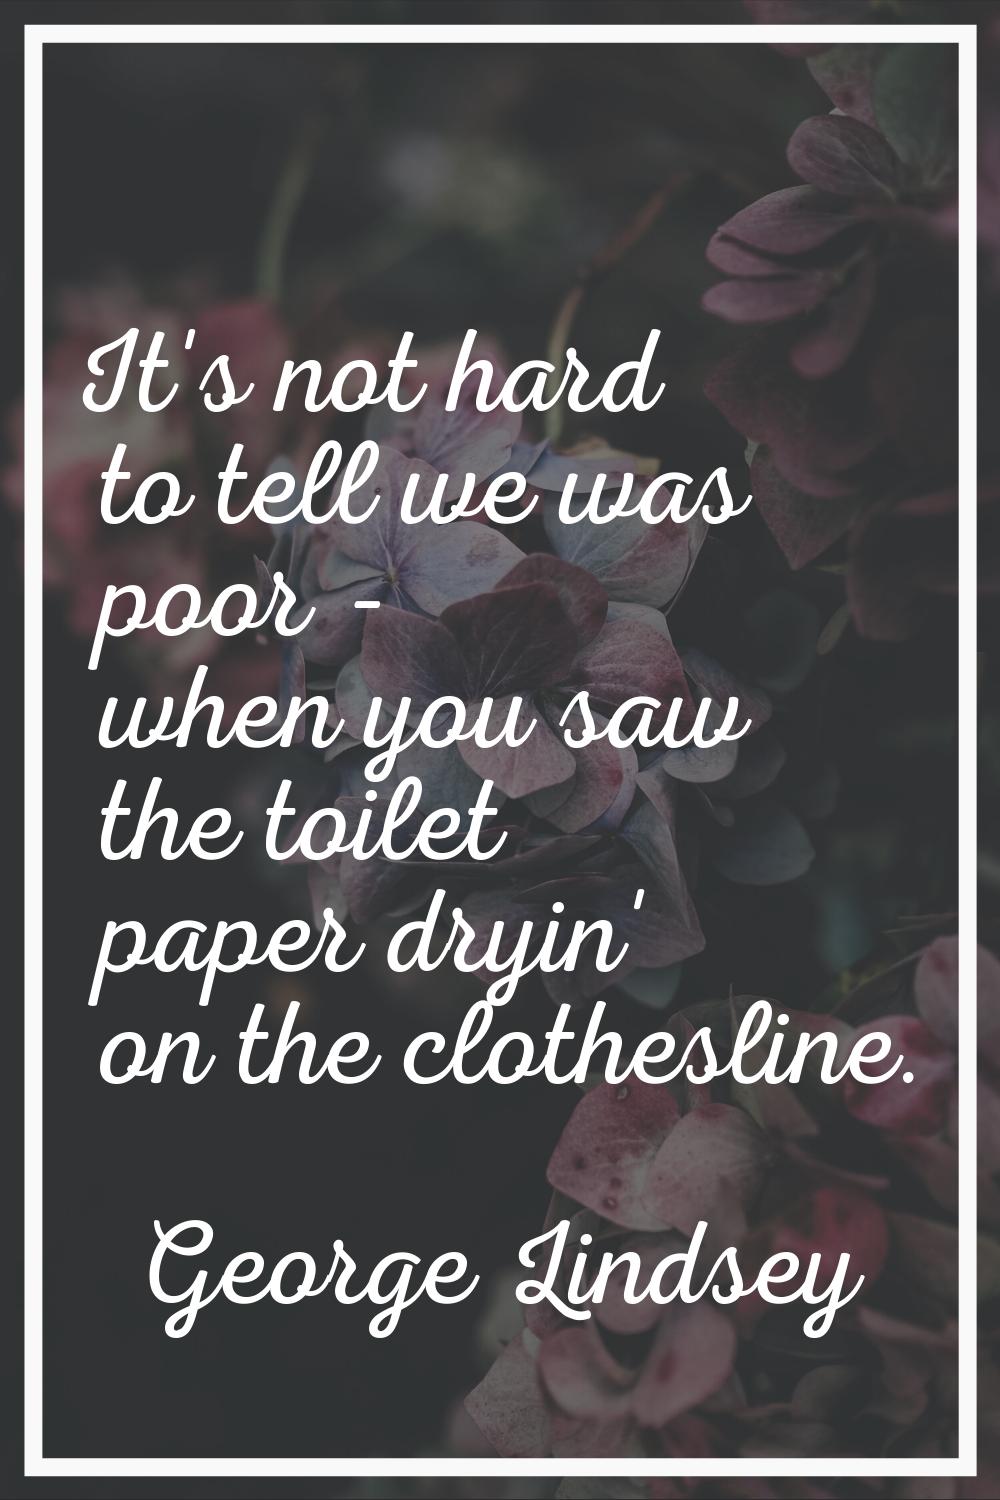 It's not hard to tell we was poor - when you saw the toilet paper dryin' on the clothesline.